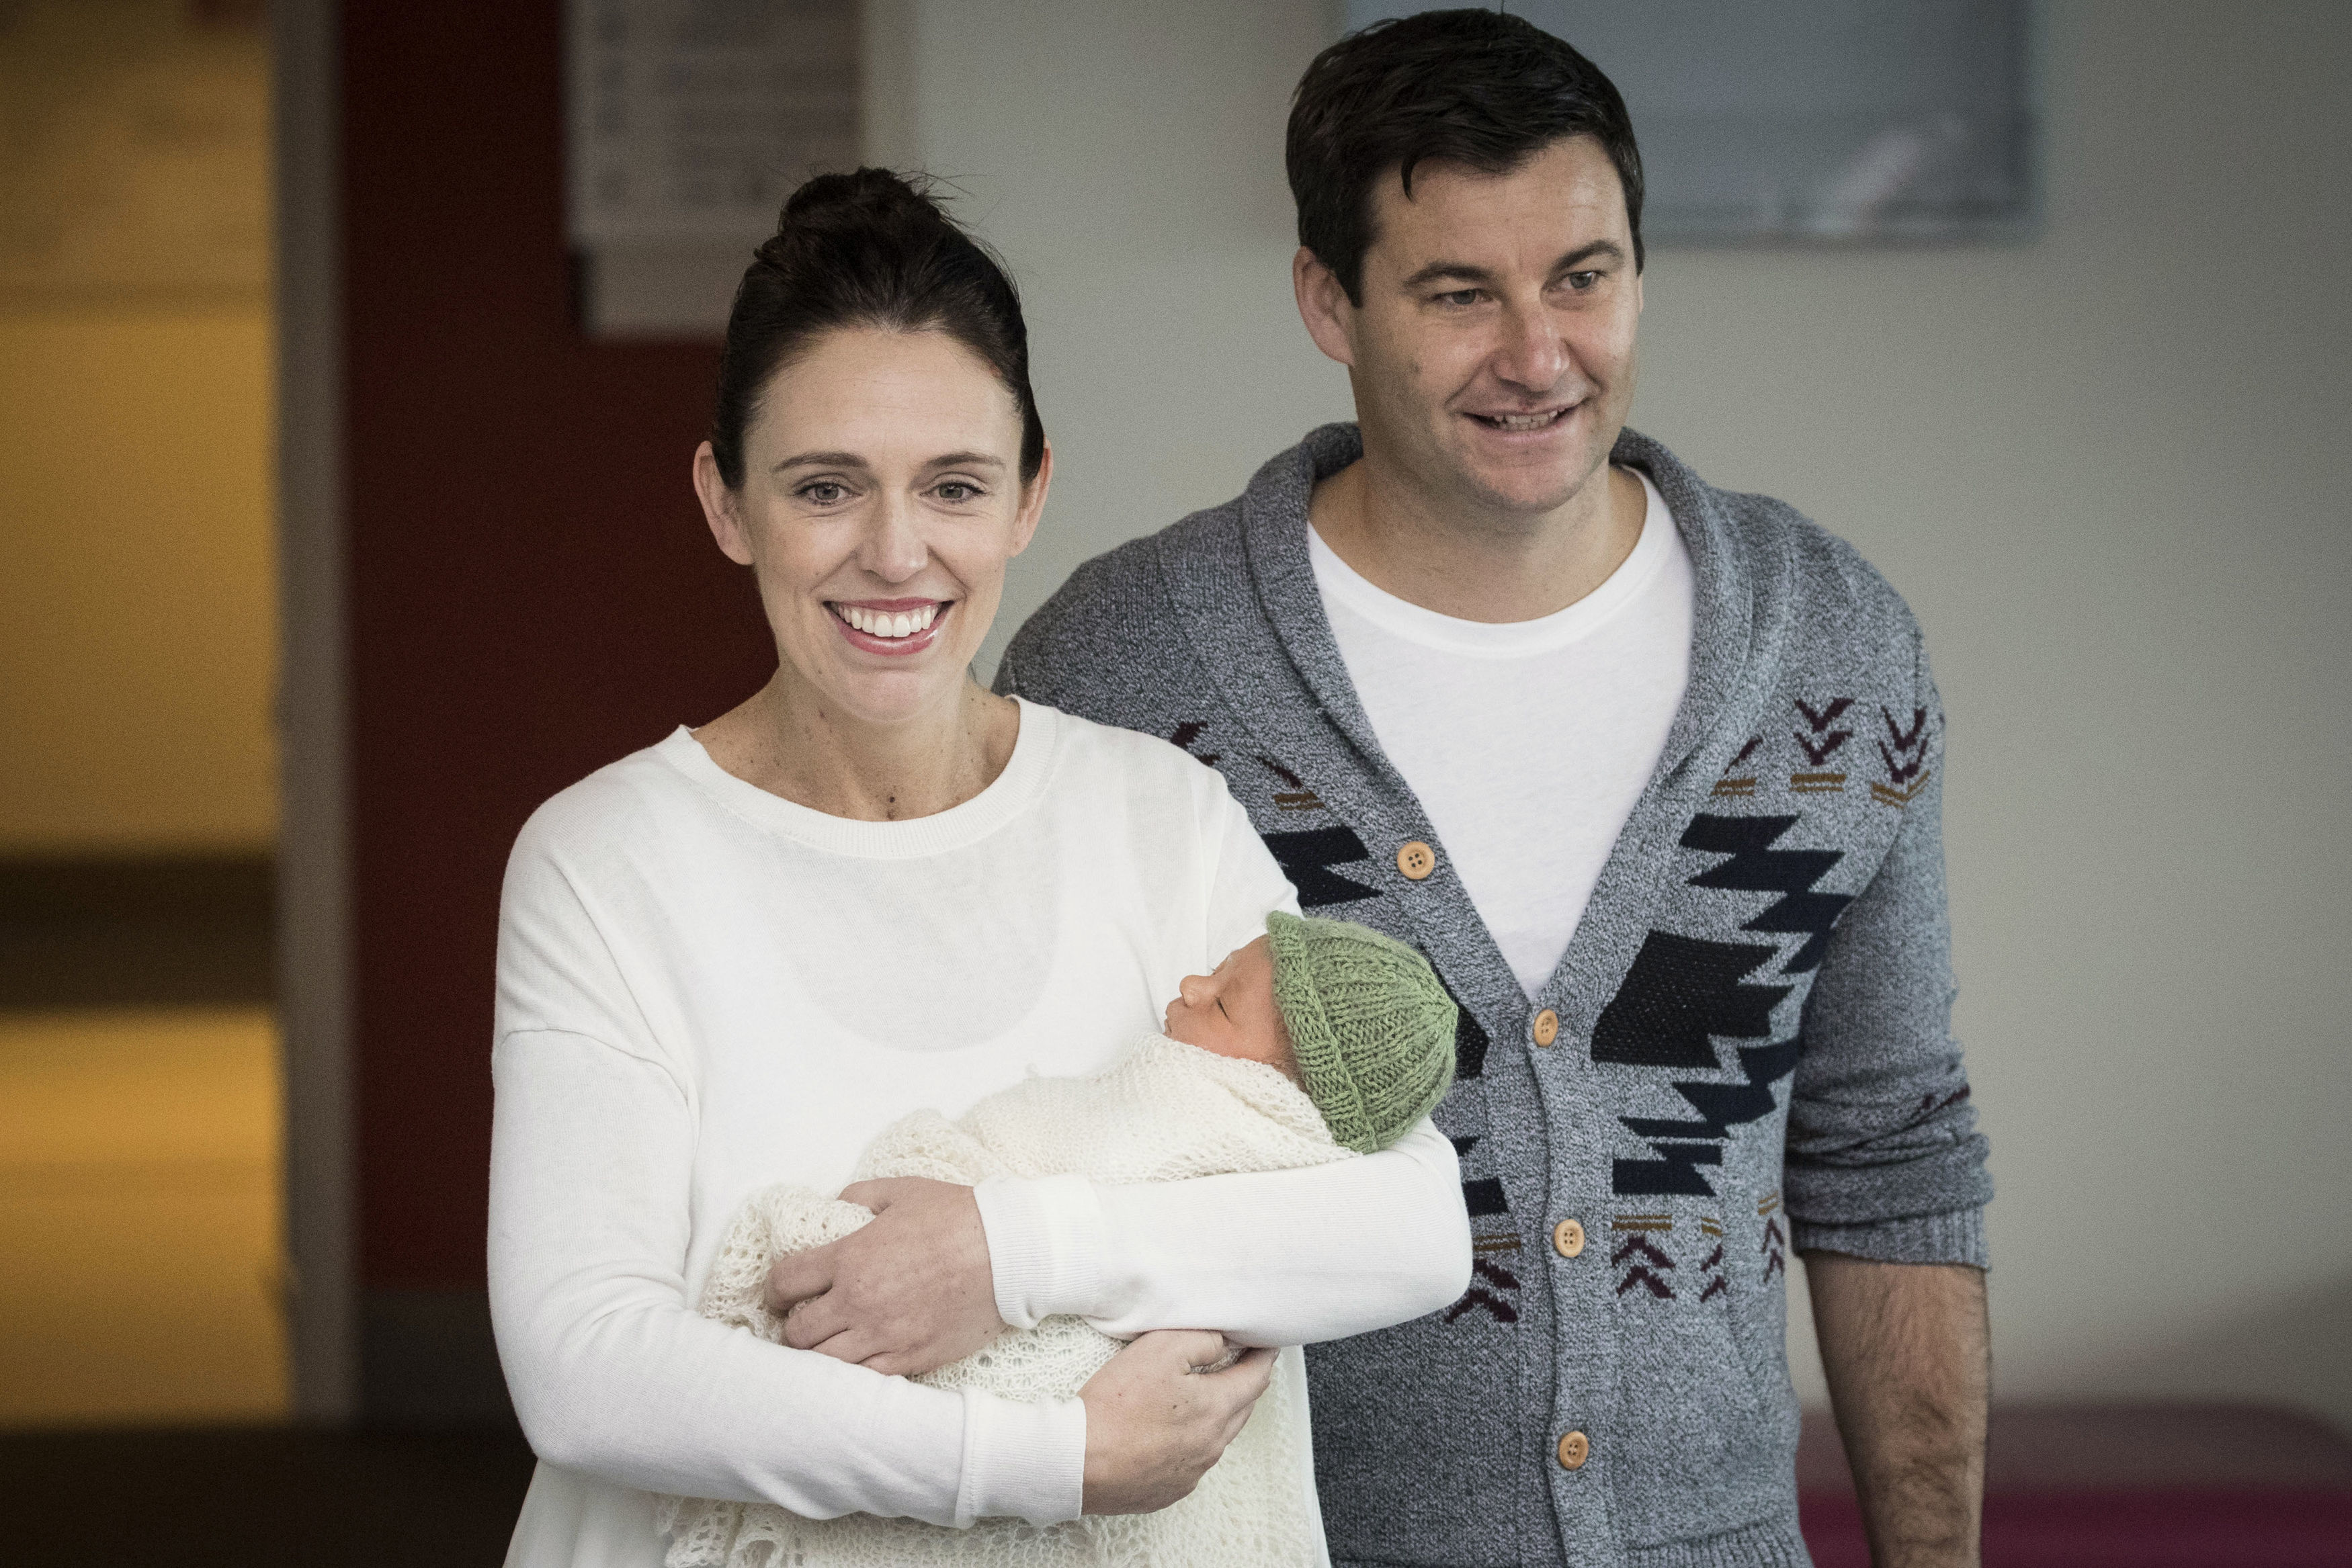 New Zealand Prime Minister Jacinda Ardern, left, with her partner Clarke Gayford, holds their newly born baby girl, Neve, at Auckland Hospital on Sunday, June 24, 2018. Ardern made her first public appearance on Sunday since giving birth to her daughter on Thursday. (Greg Bowker/New Zealand Herald via AP)